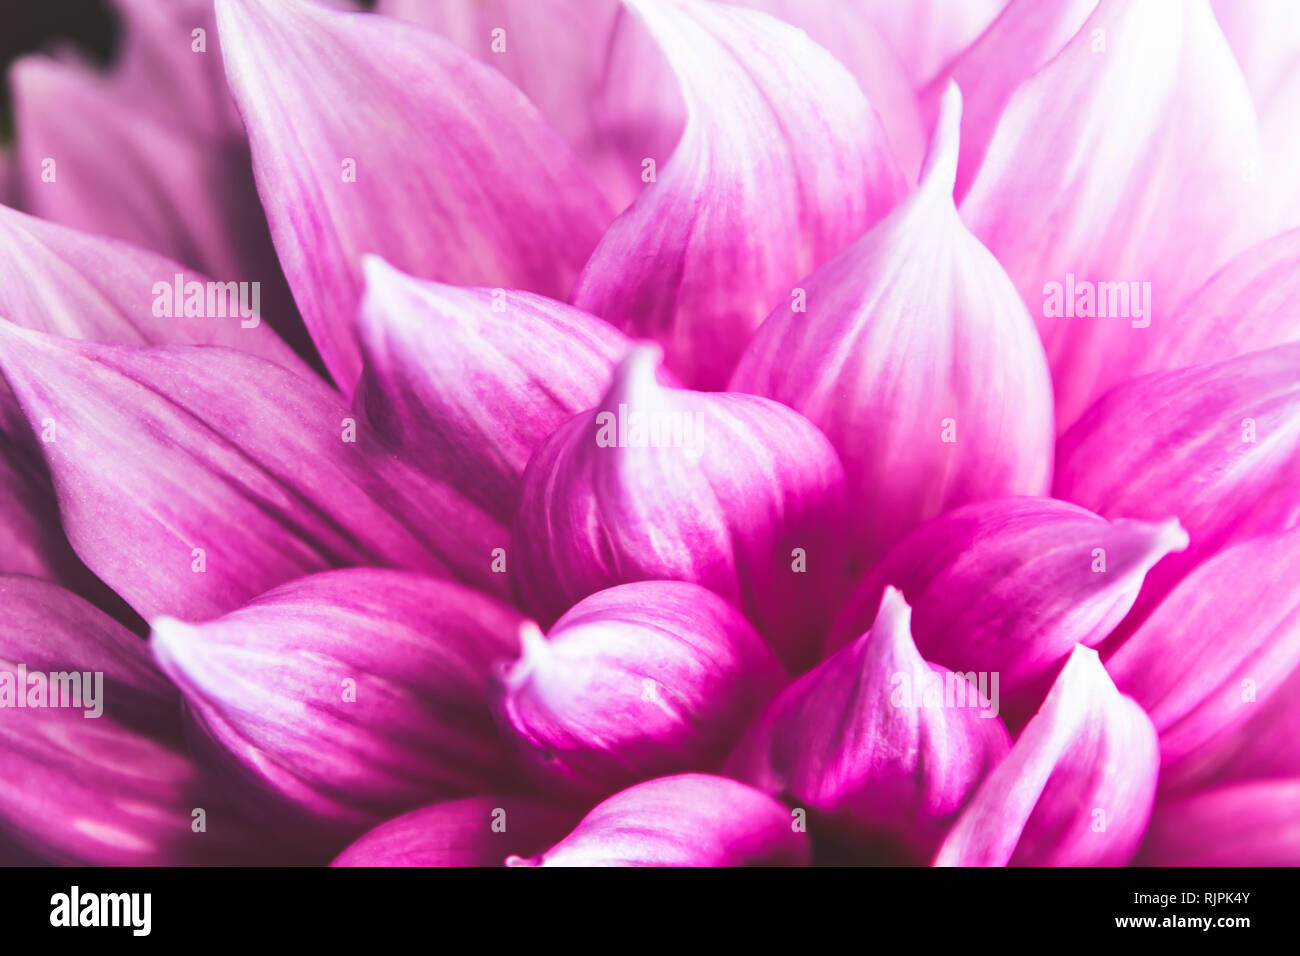 Purple white dahlia pinnata single flower petal in isolated close up details in muted elegant filter Stock Photo